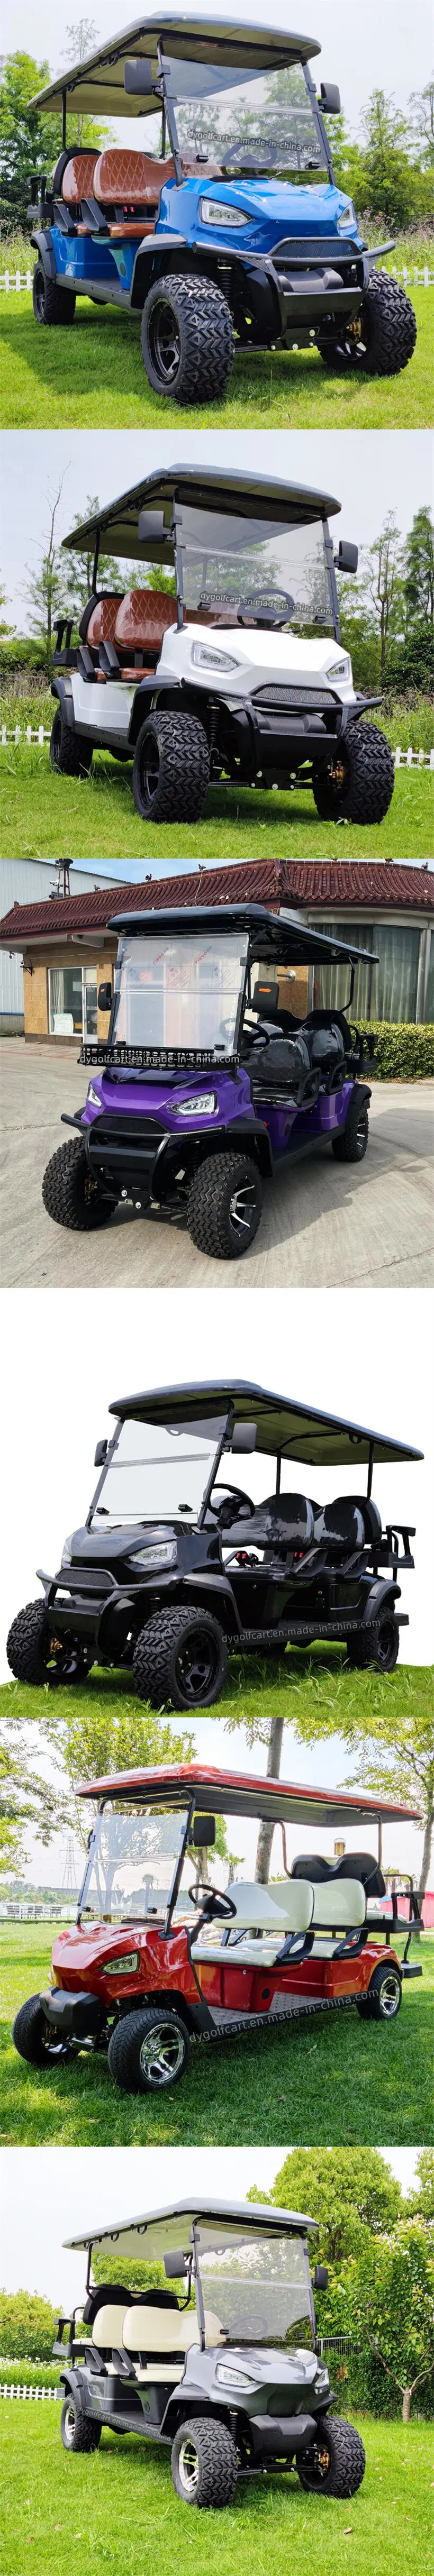 Cozy New Innovation 48V/72V Golf Cart Cool 6 Seater Golf Cart Electric for Golf Place